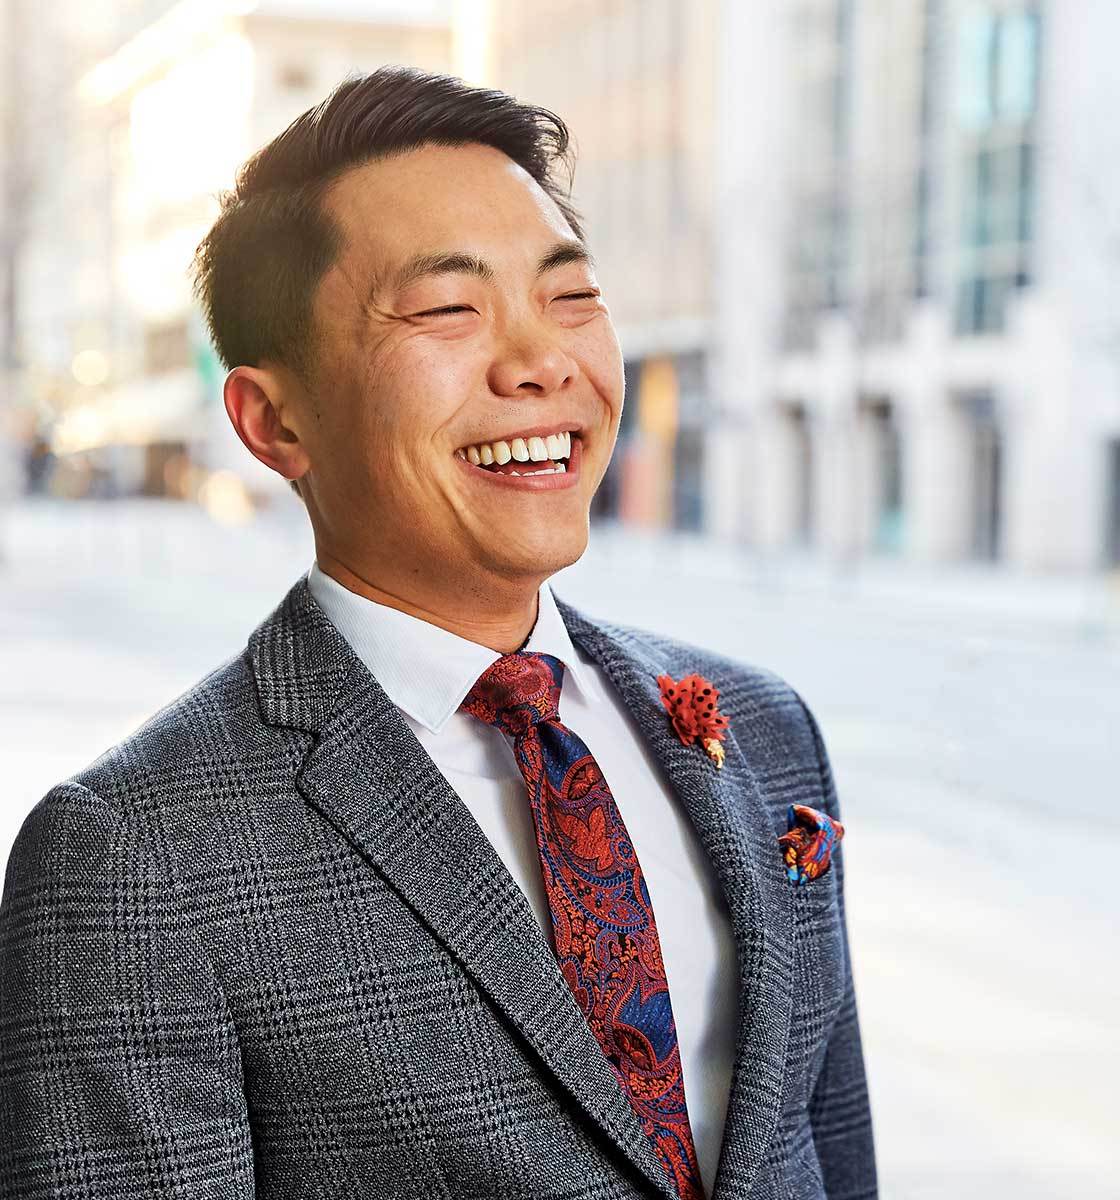 SERIAL ENTREPRENEUR QUAN LY SHARES HIS THREE TIPS FOR LIVING A BETTER LIFE 